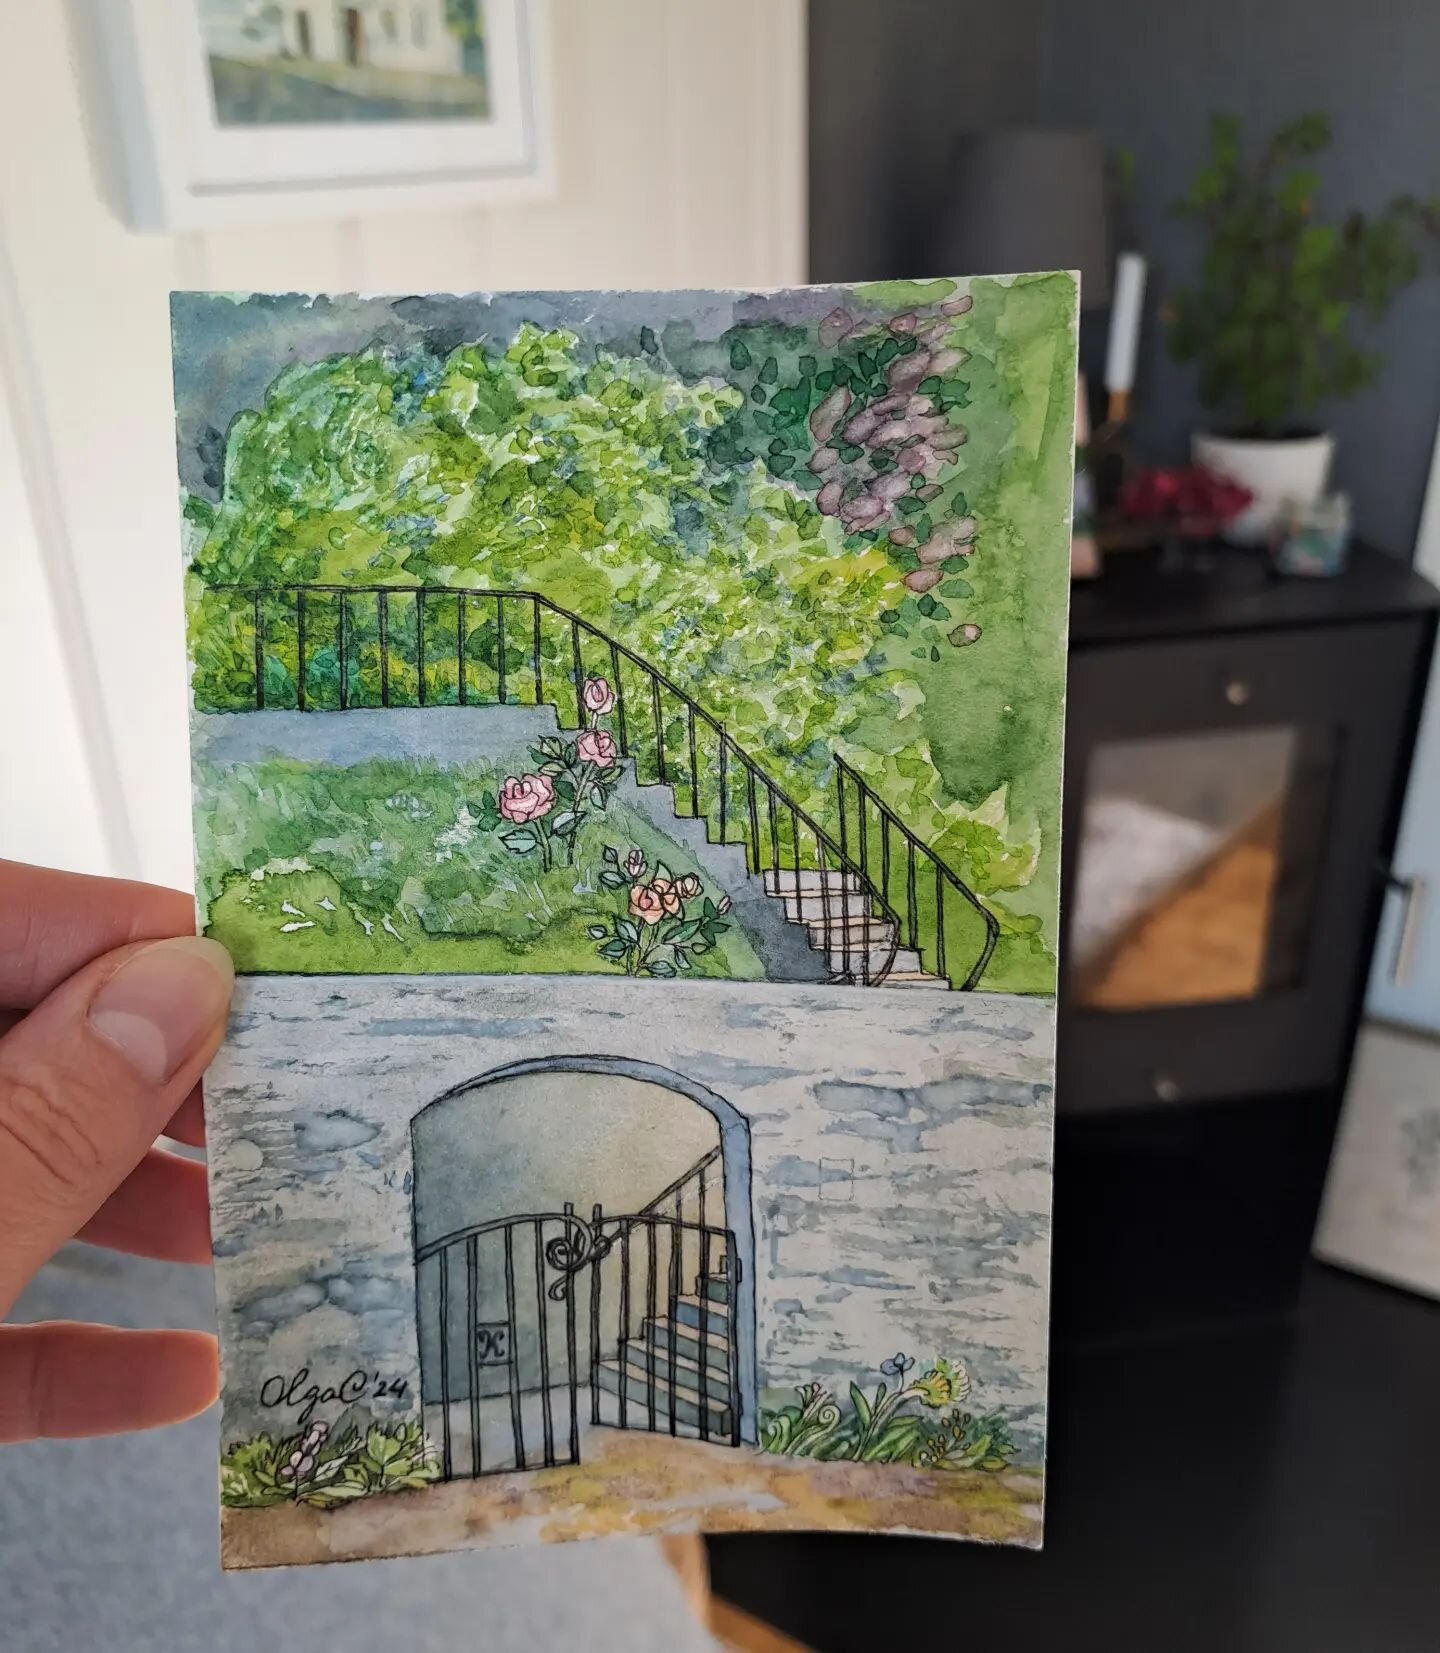 A little house gate that reminds me of Italy.
#bergen #miniature #watercolorgate